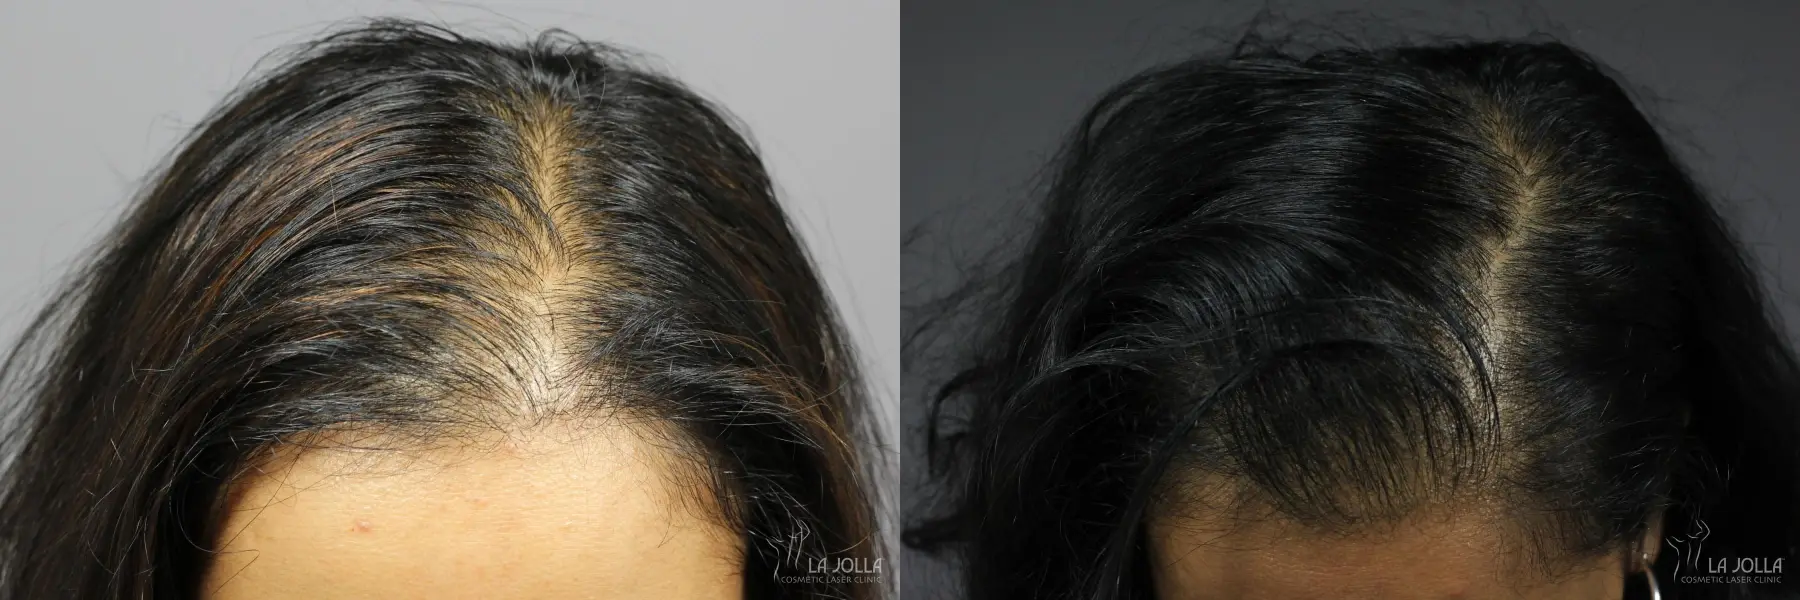 PRP (Platelet-Rich Plasma): Patient 5 - Before and After  